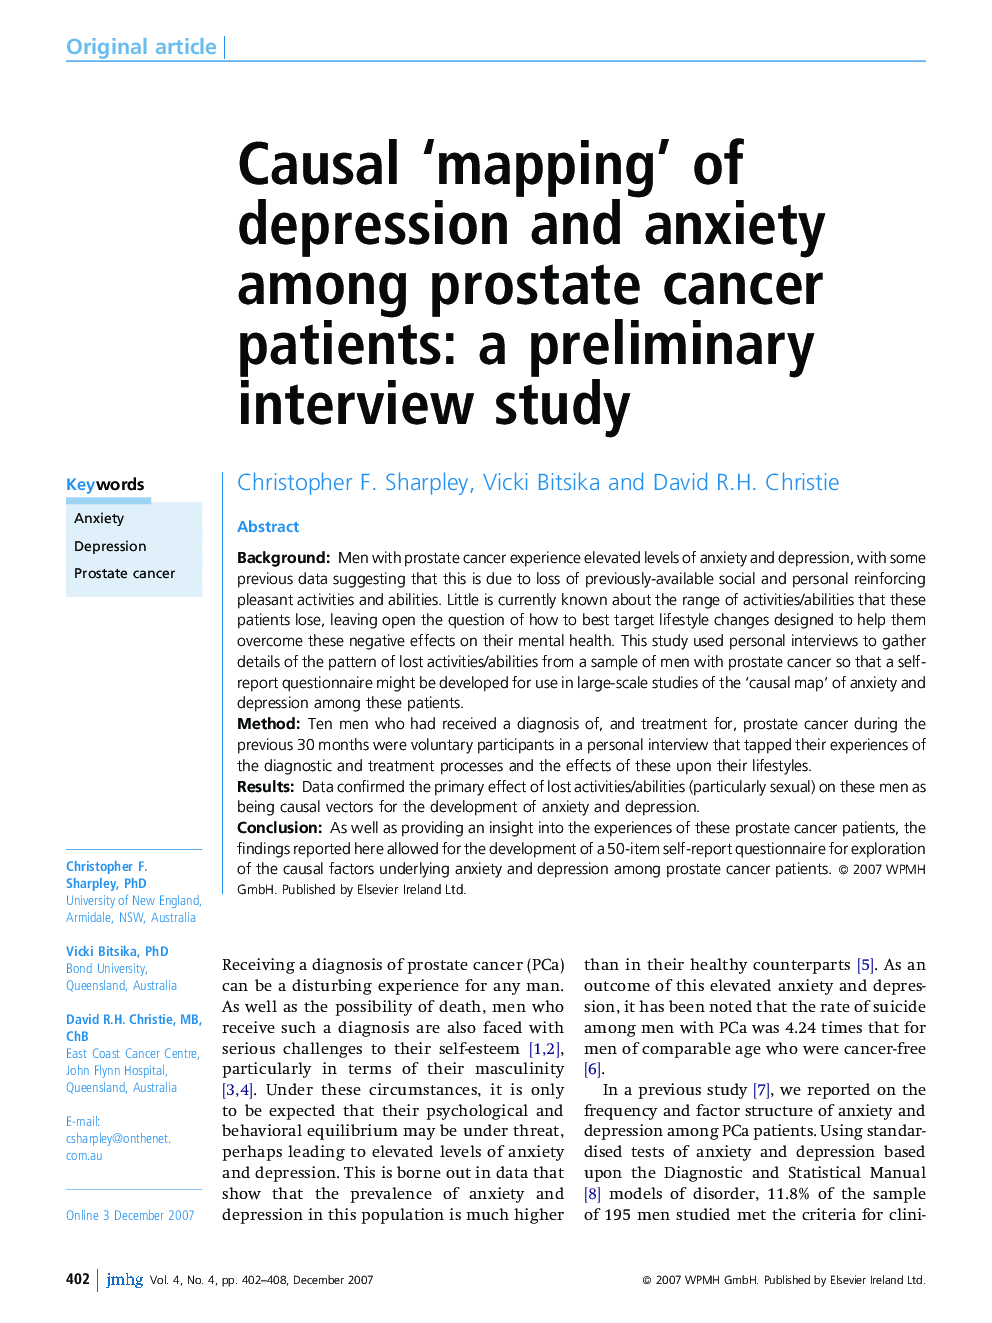 Causal' mapping' of depression and anxiety among prostate cancer patients: a preliminary interview study